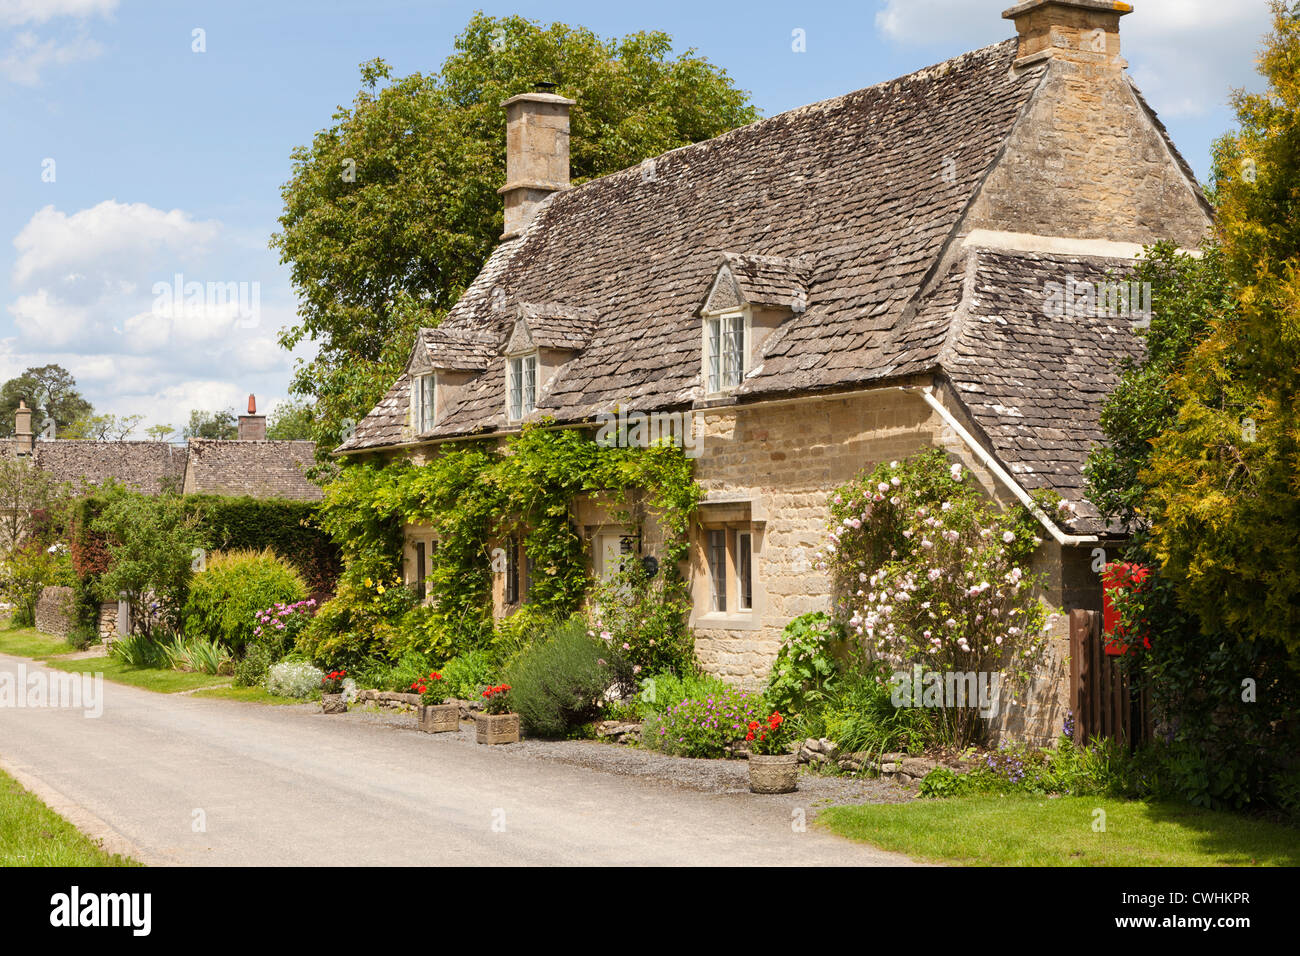 A typical traditional stone cottage in the Cotswold village of Taynton, Oxfordshire, UK Stock Photo